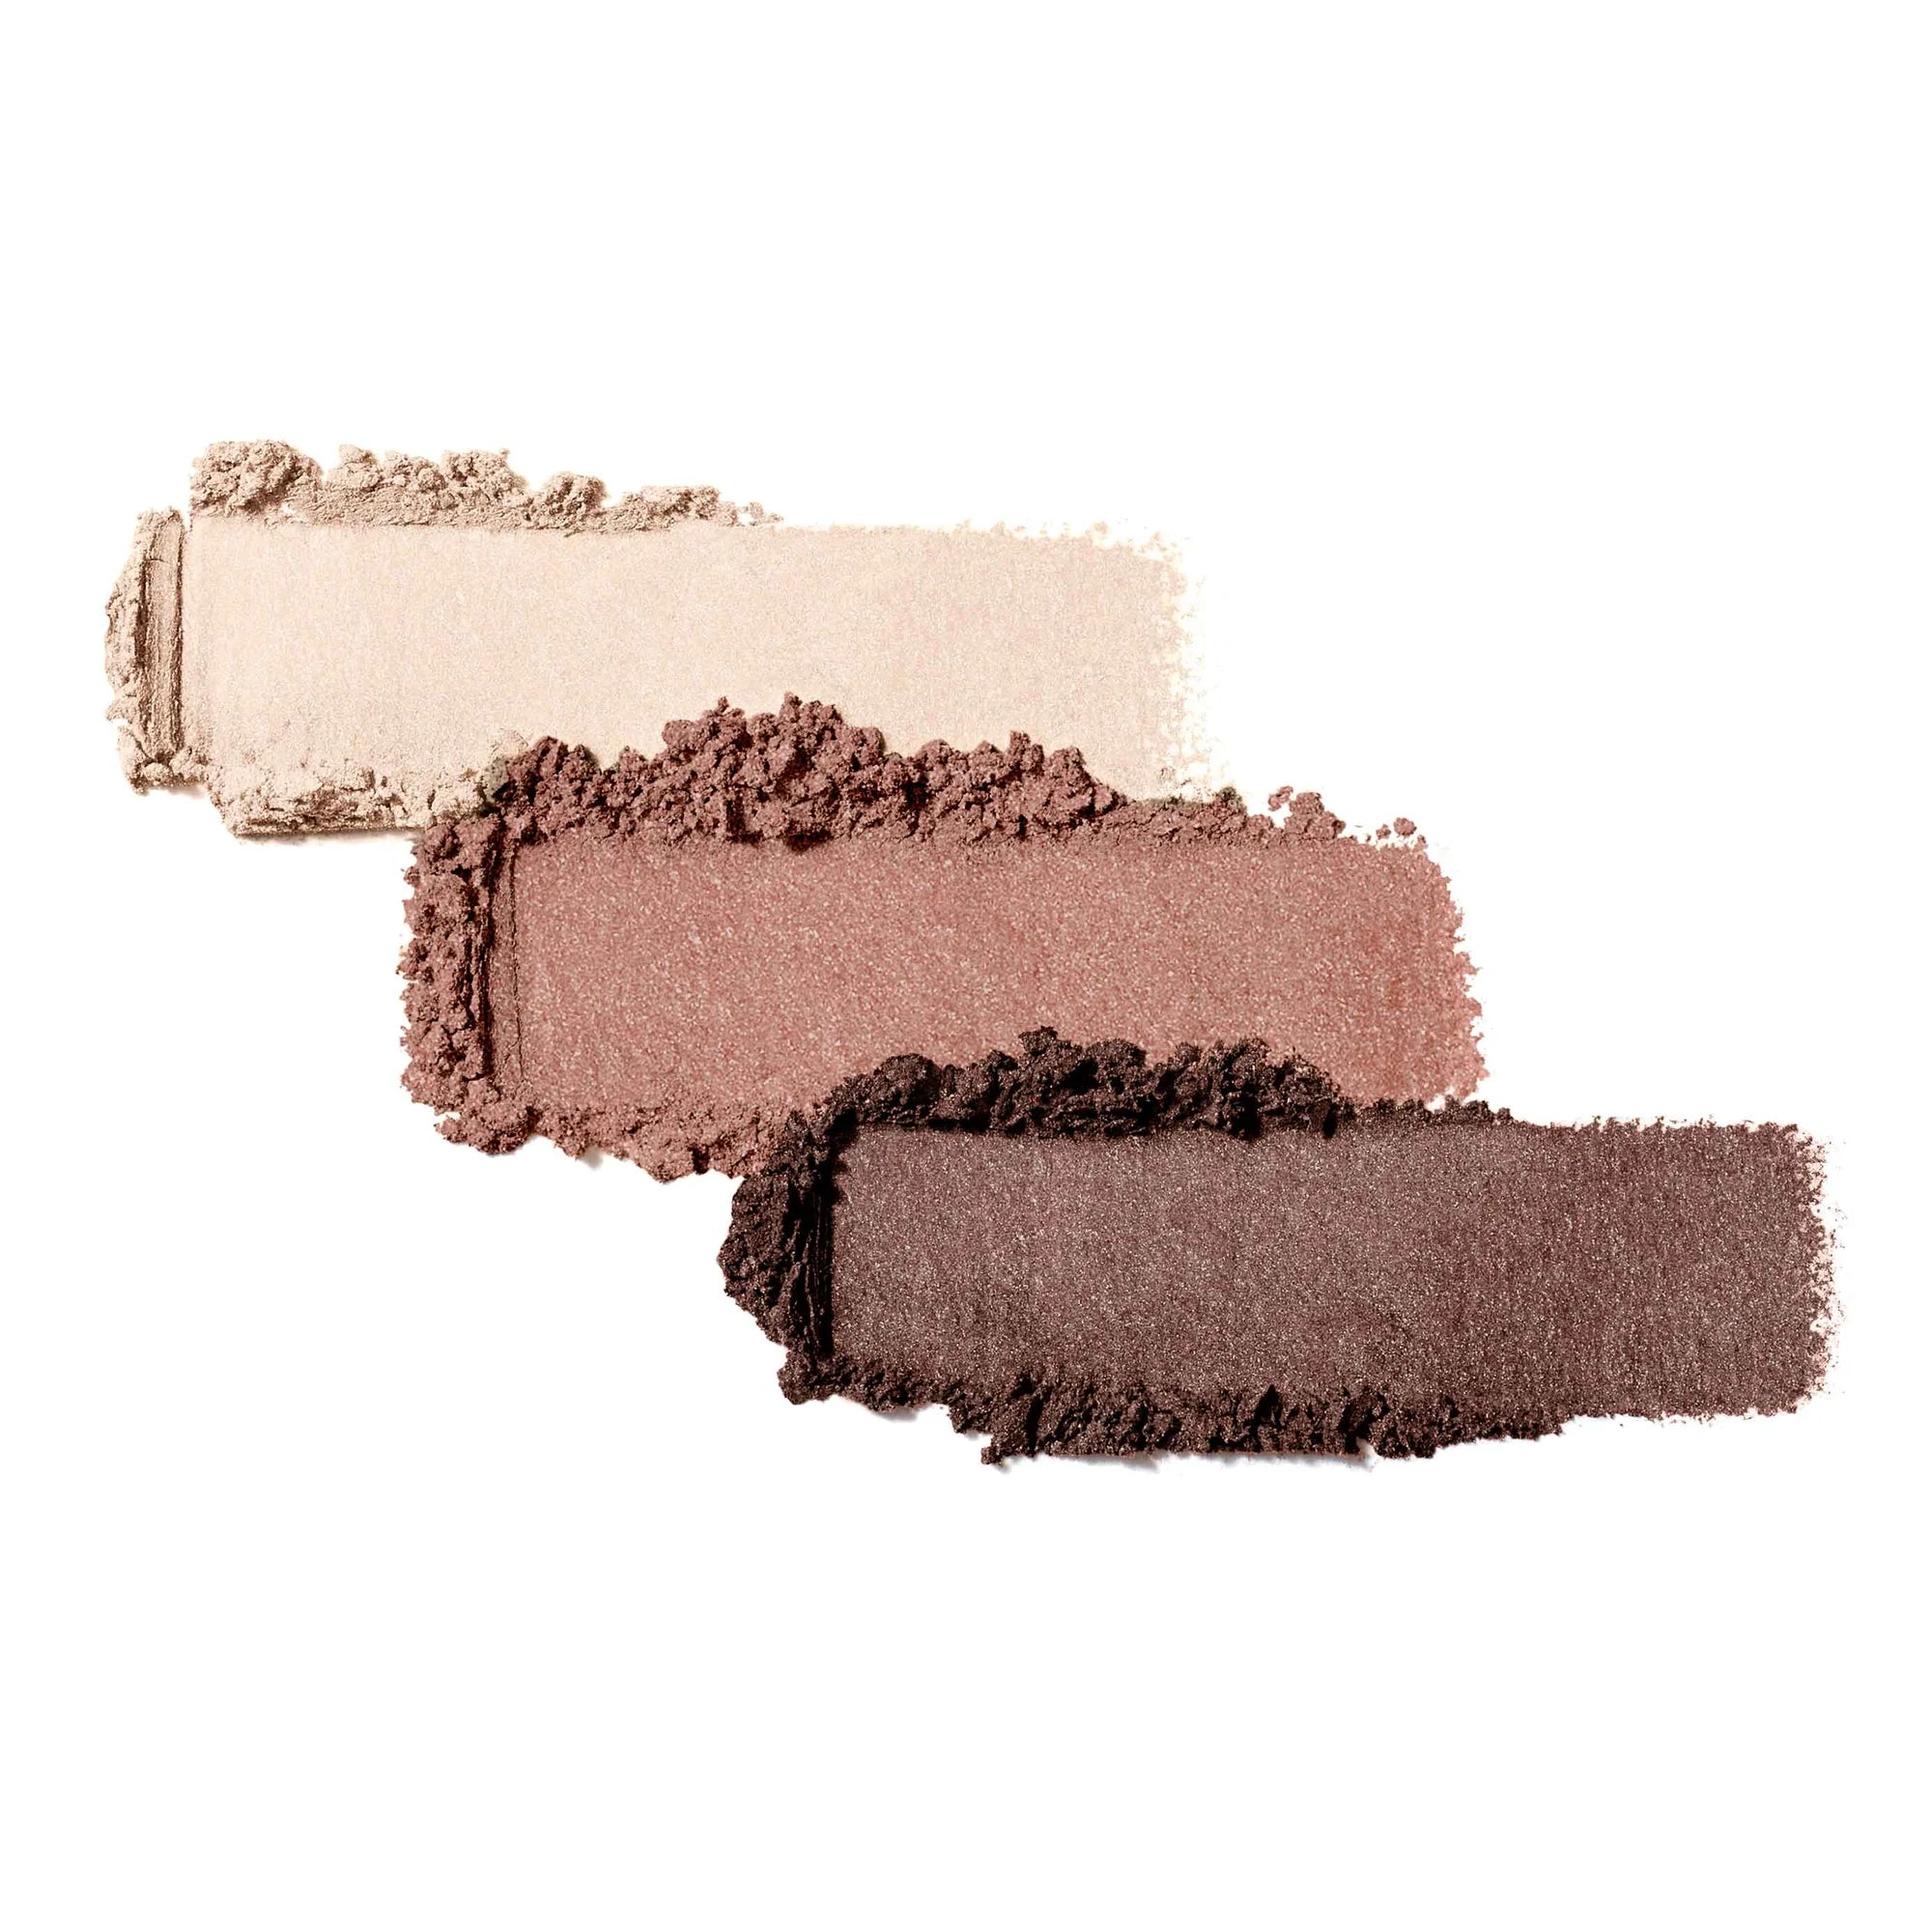 Jane Iredale's PurePressed® Eye Shadow Triple shade Pink Quartz - matte light pink, shimmery soft pink, shimmery cool plum